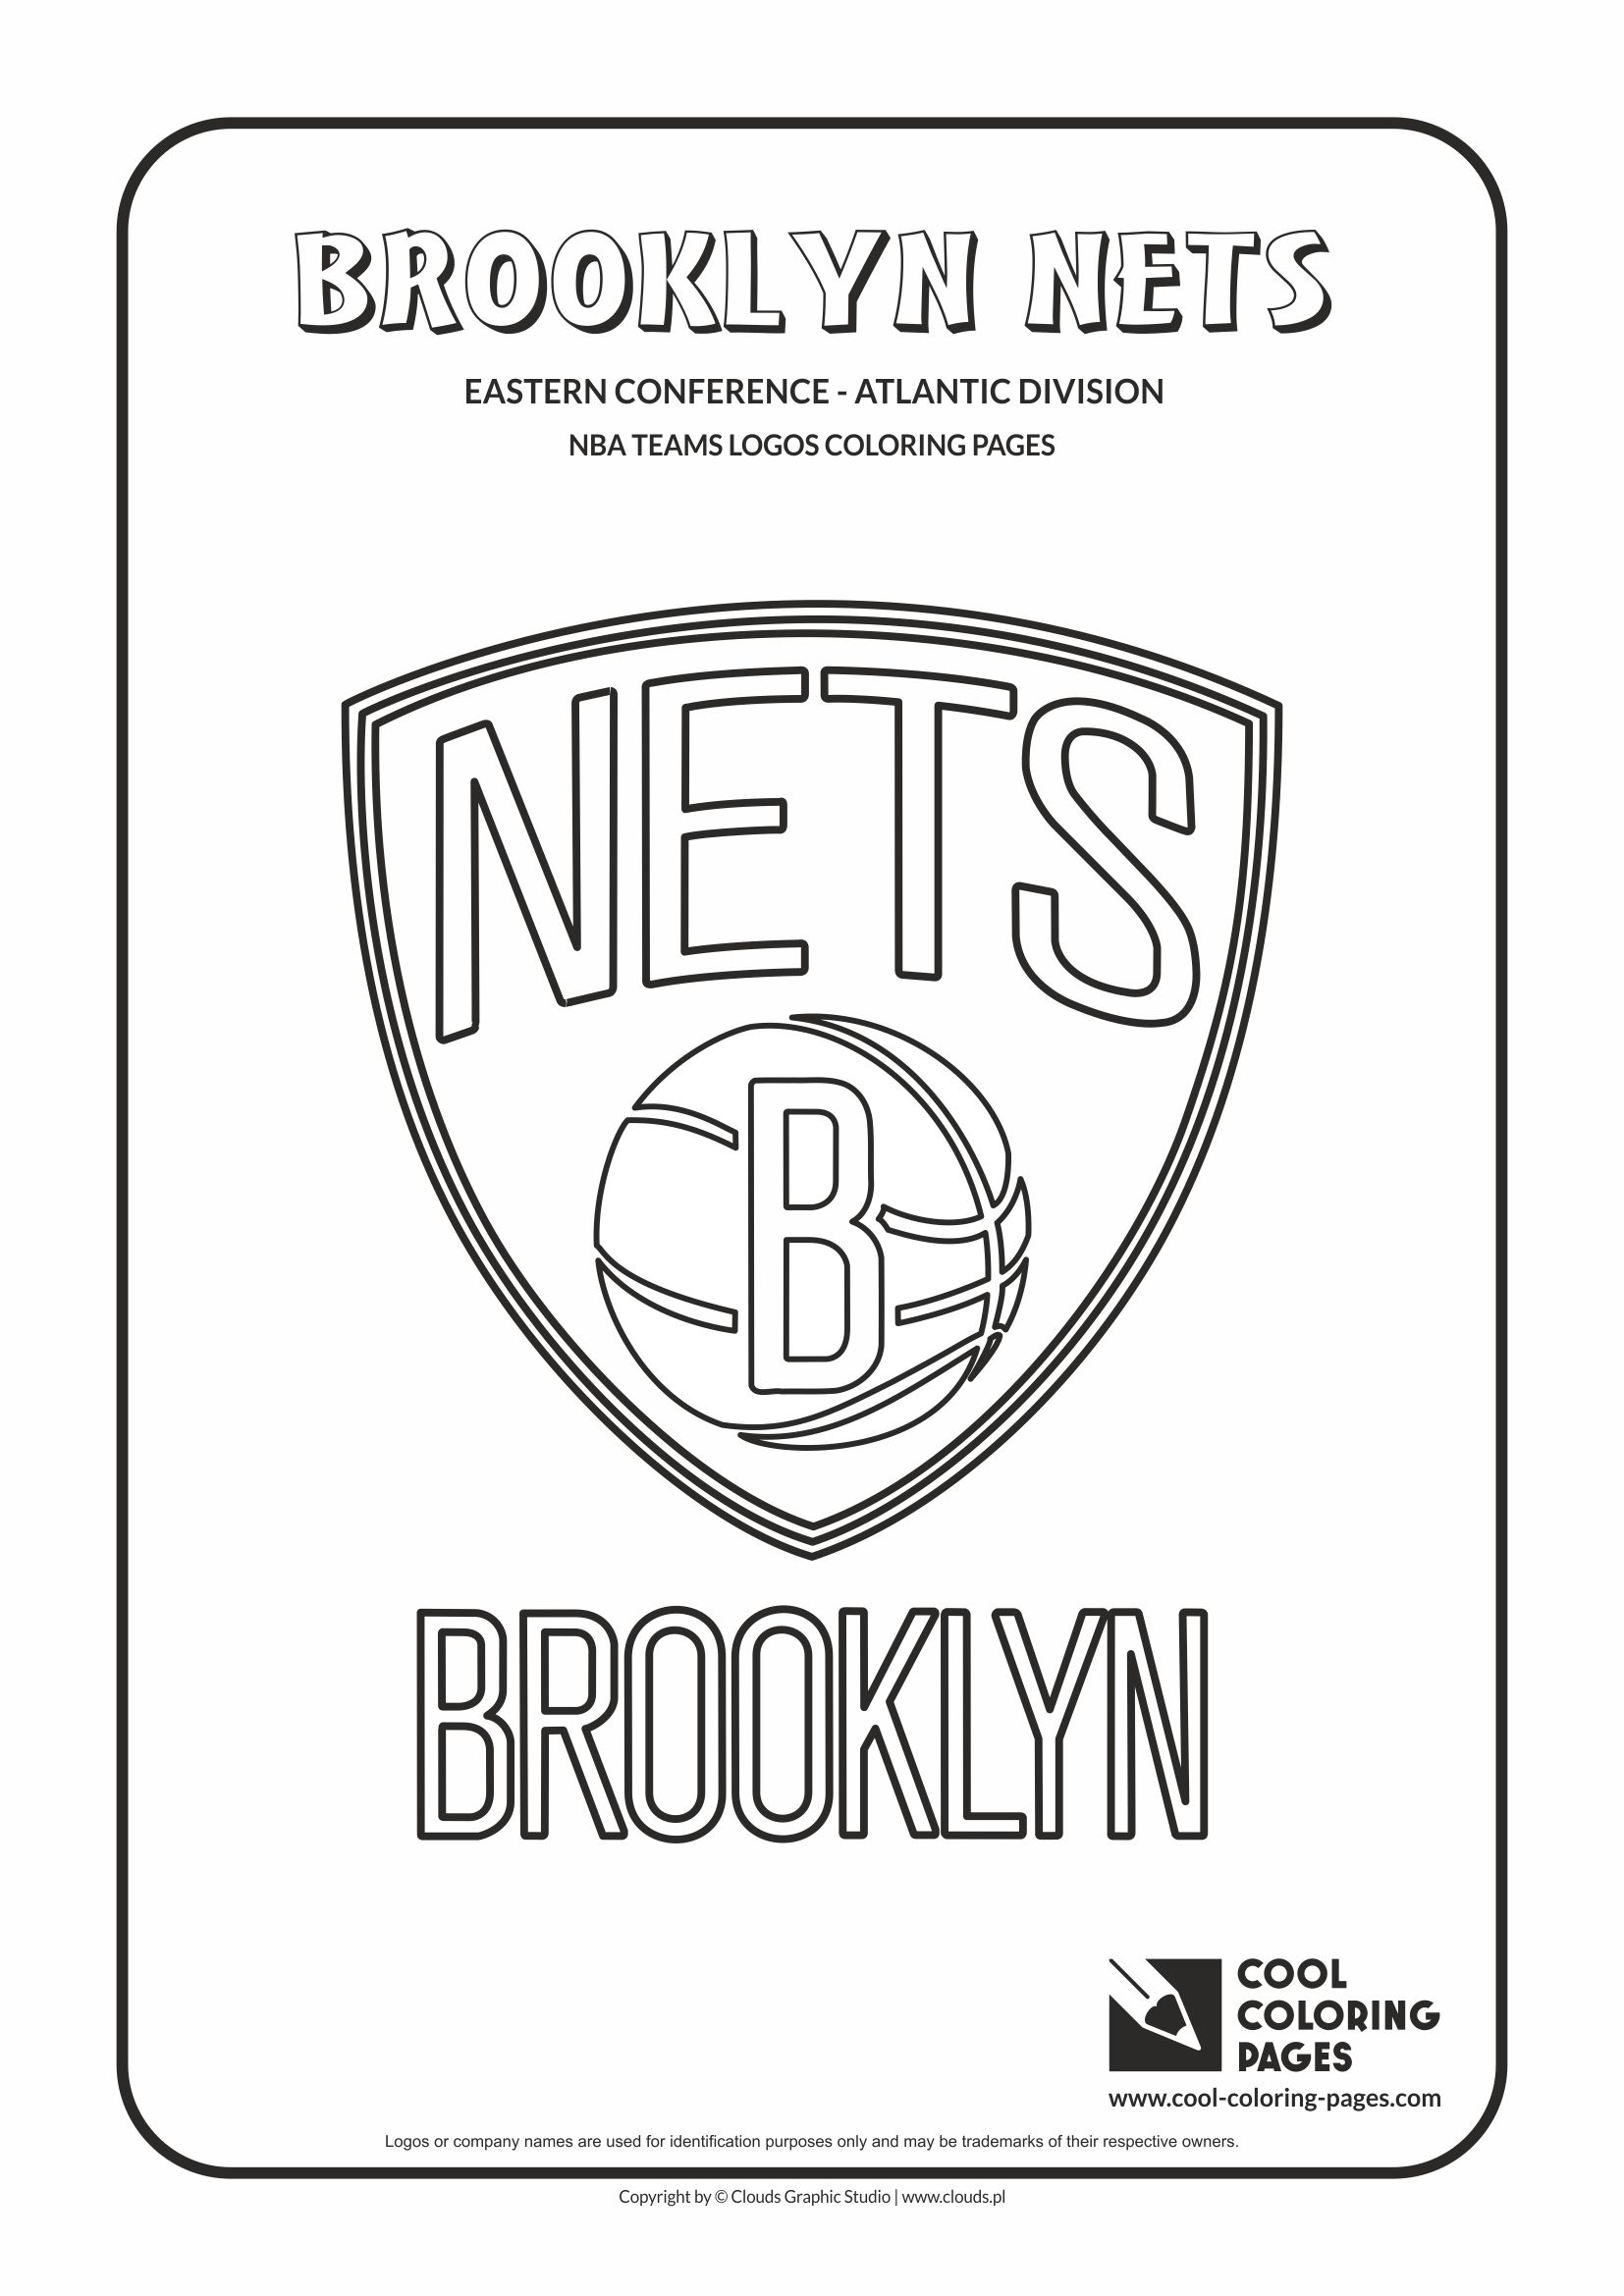 Cool Coloring Pages Brooklyn Nets - NBA basketball teams logos coloring pages - Cool ...